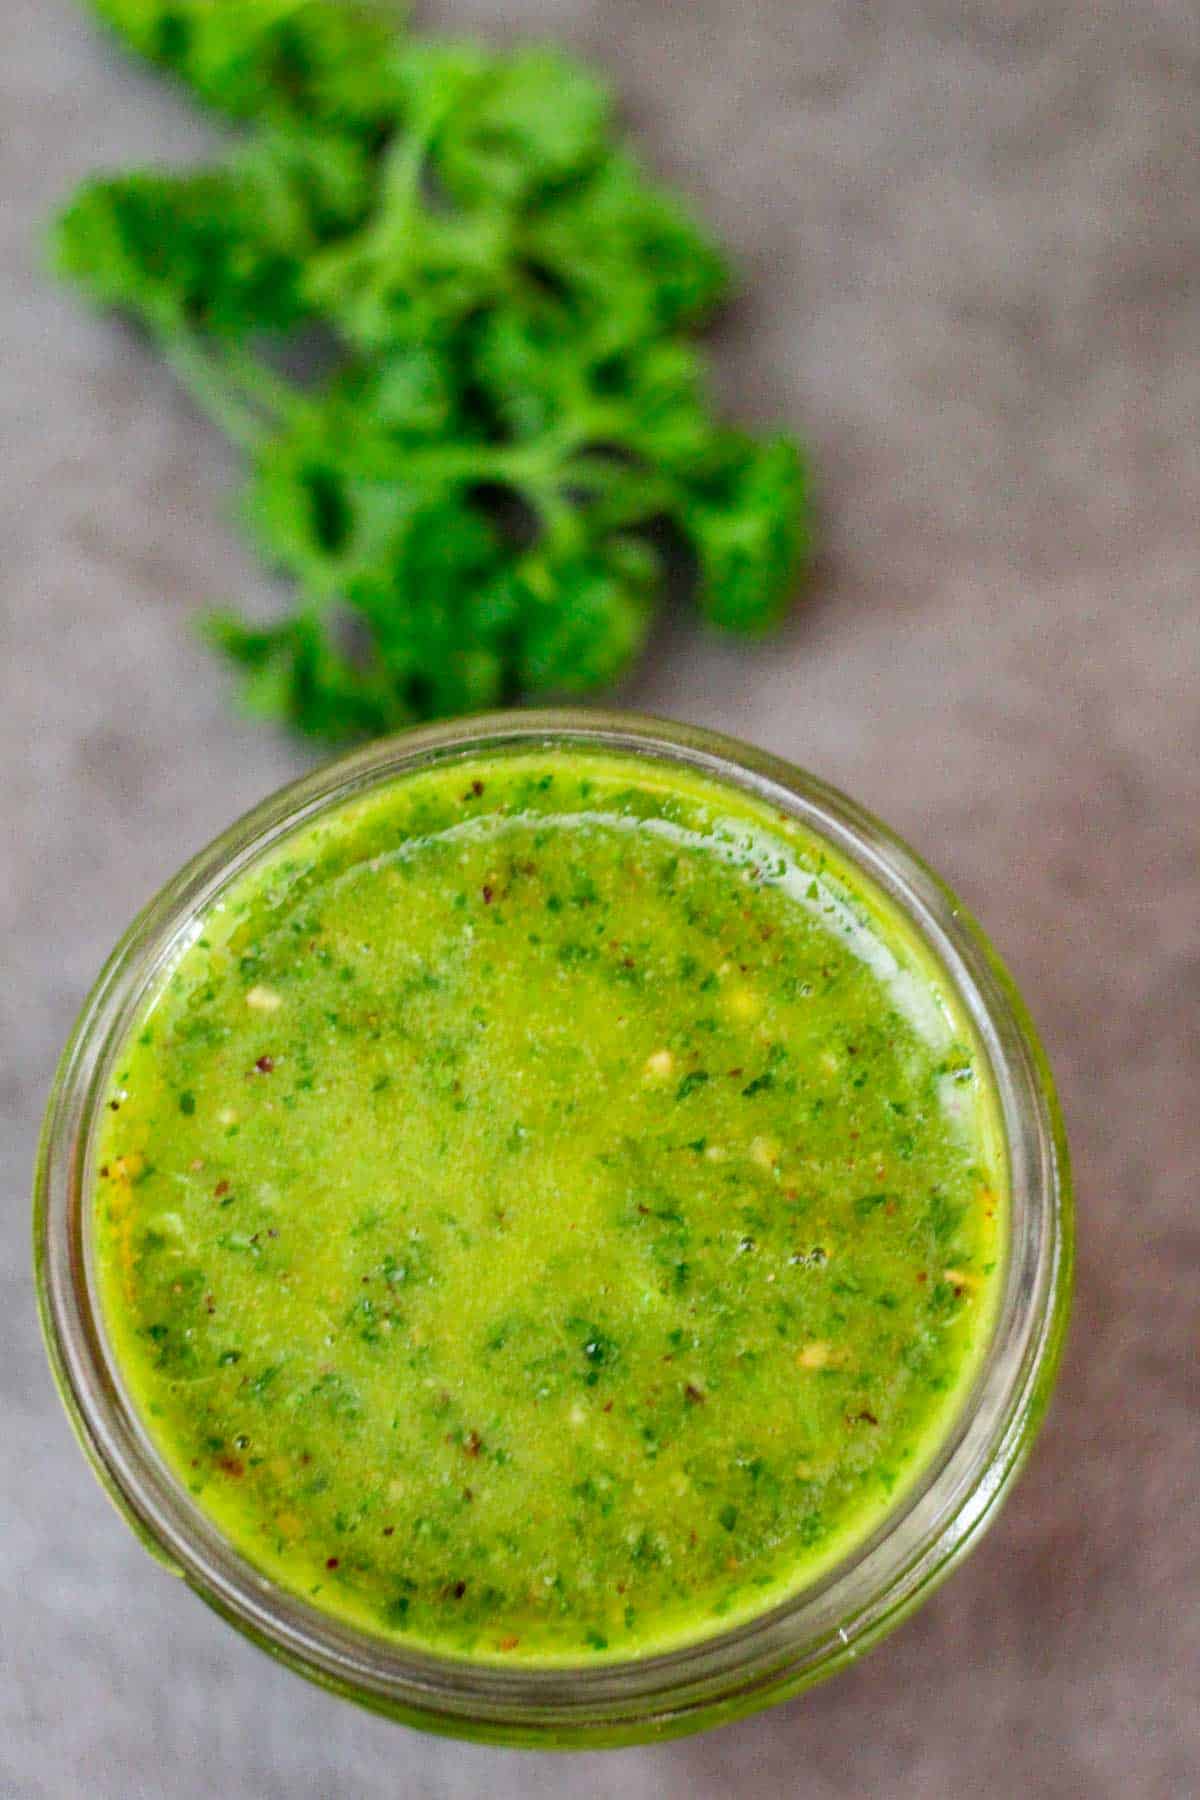 Parsley za'atar sauce or marinade on a jar. You can see some fresh parsley next to the jar.